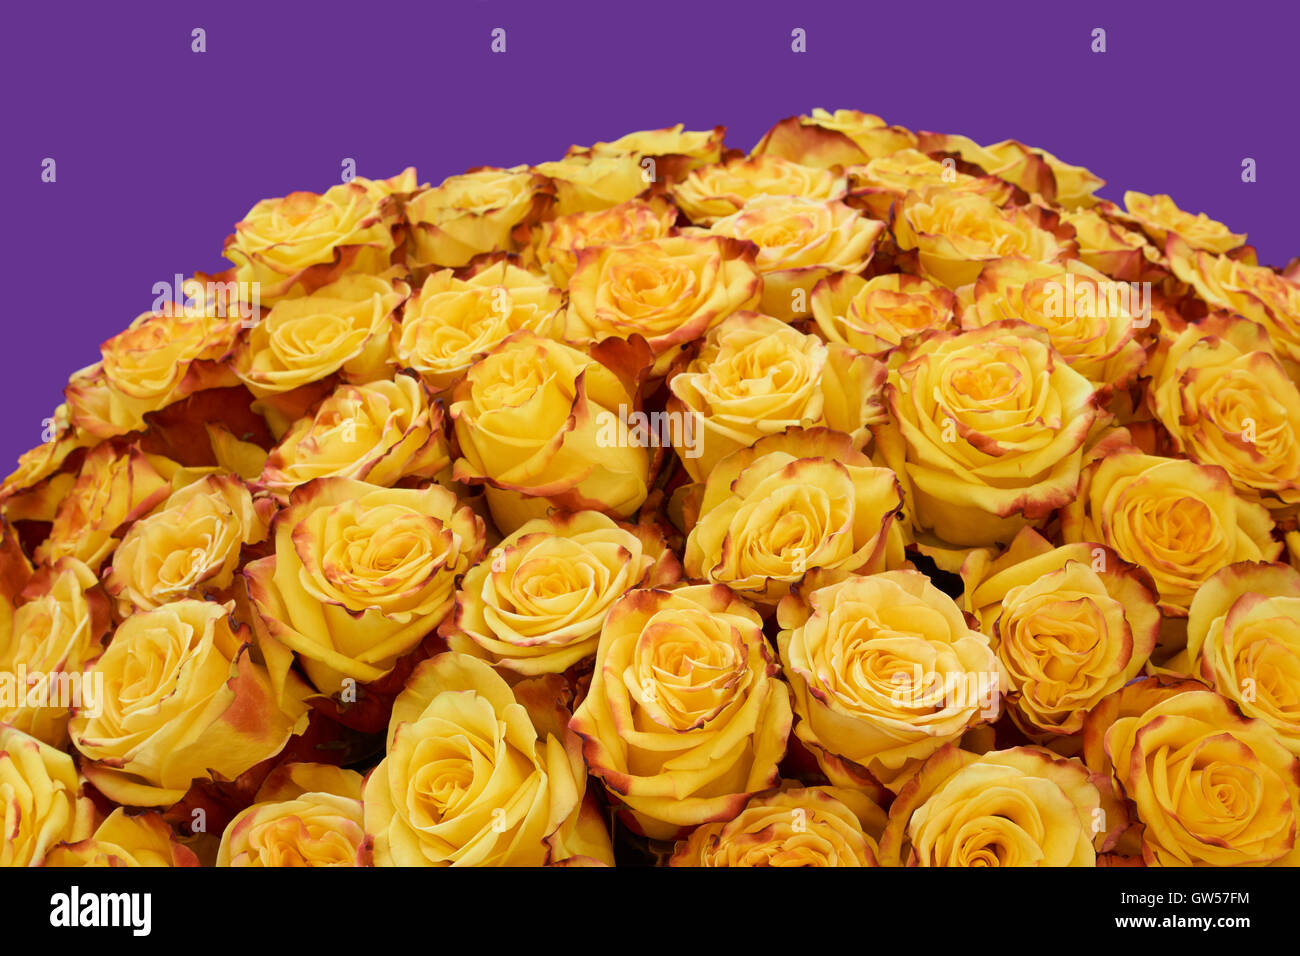 Bunch of yellow roses with dark borders on violet background Stock Photo